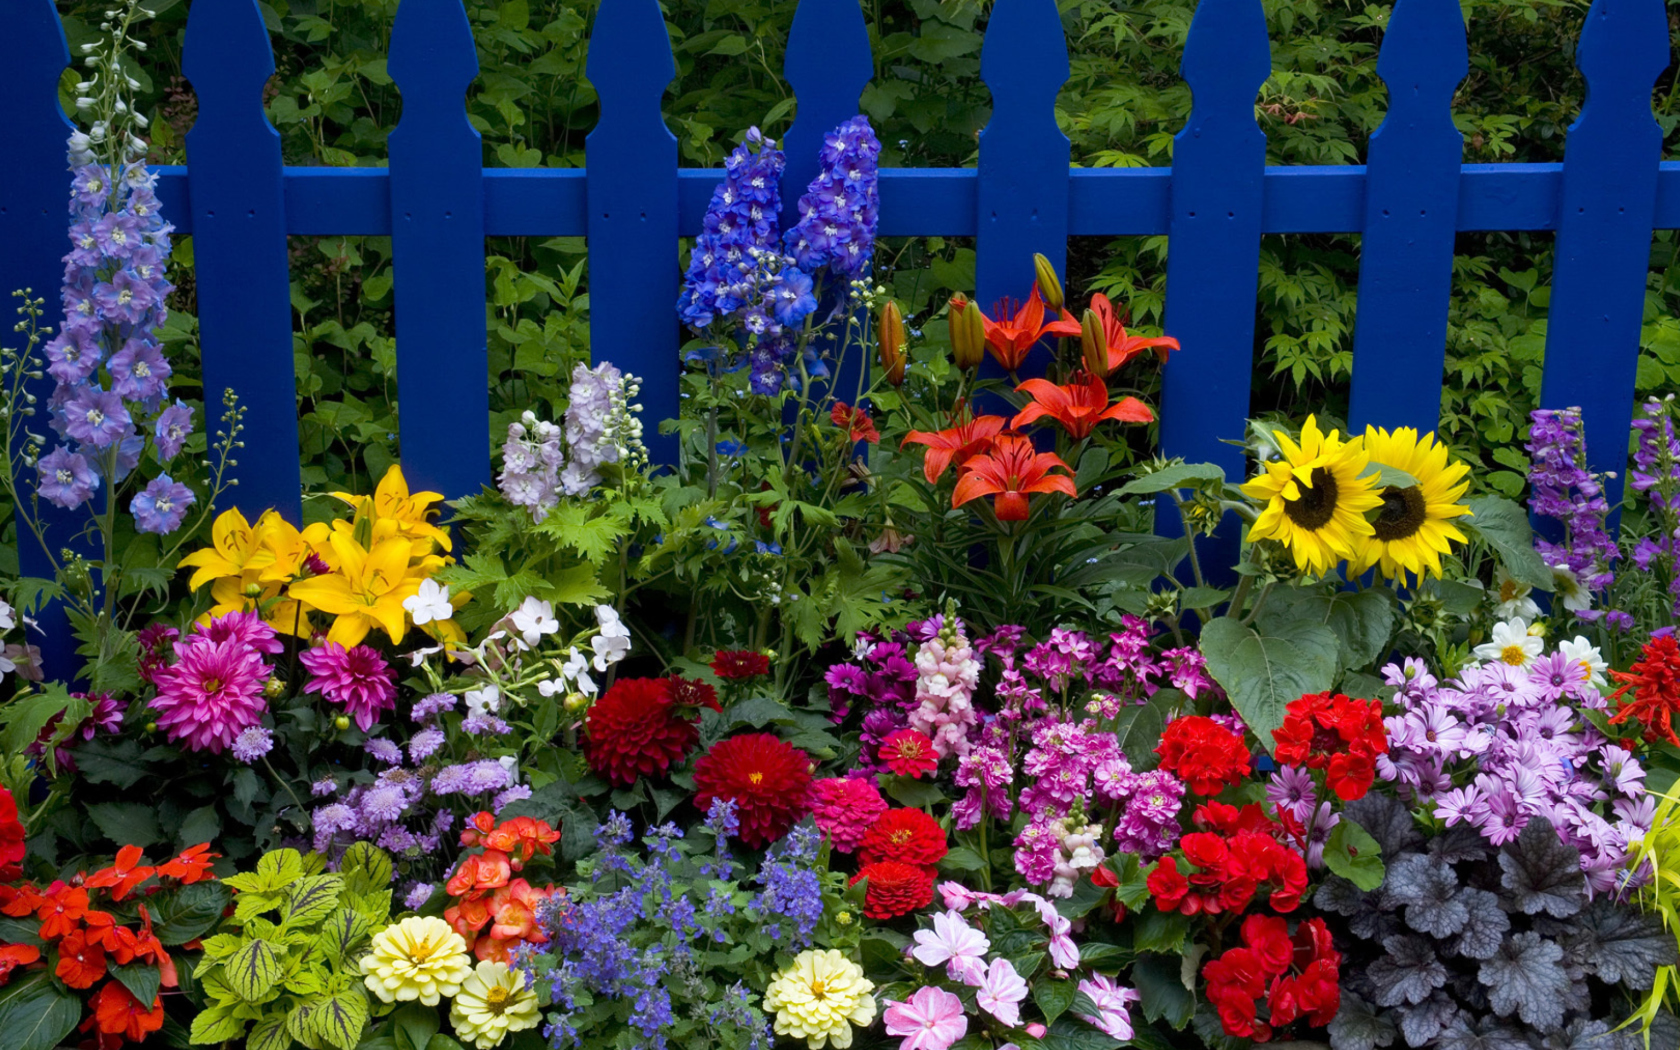 Garden Flowers In Front Of Bright Blue Fence wallpaper 1680x1050